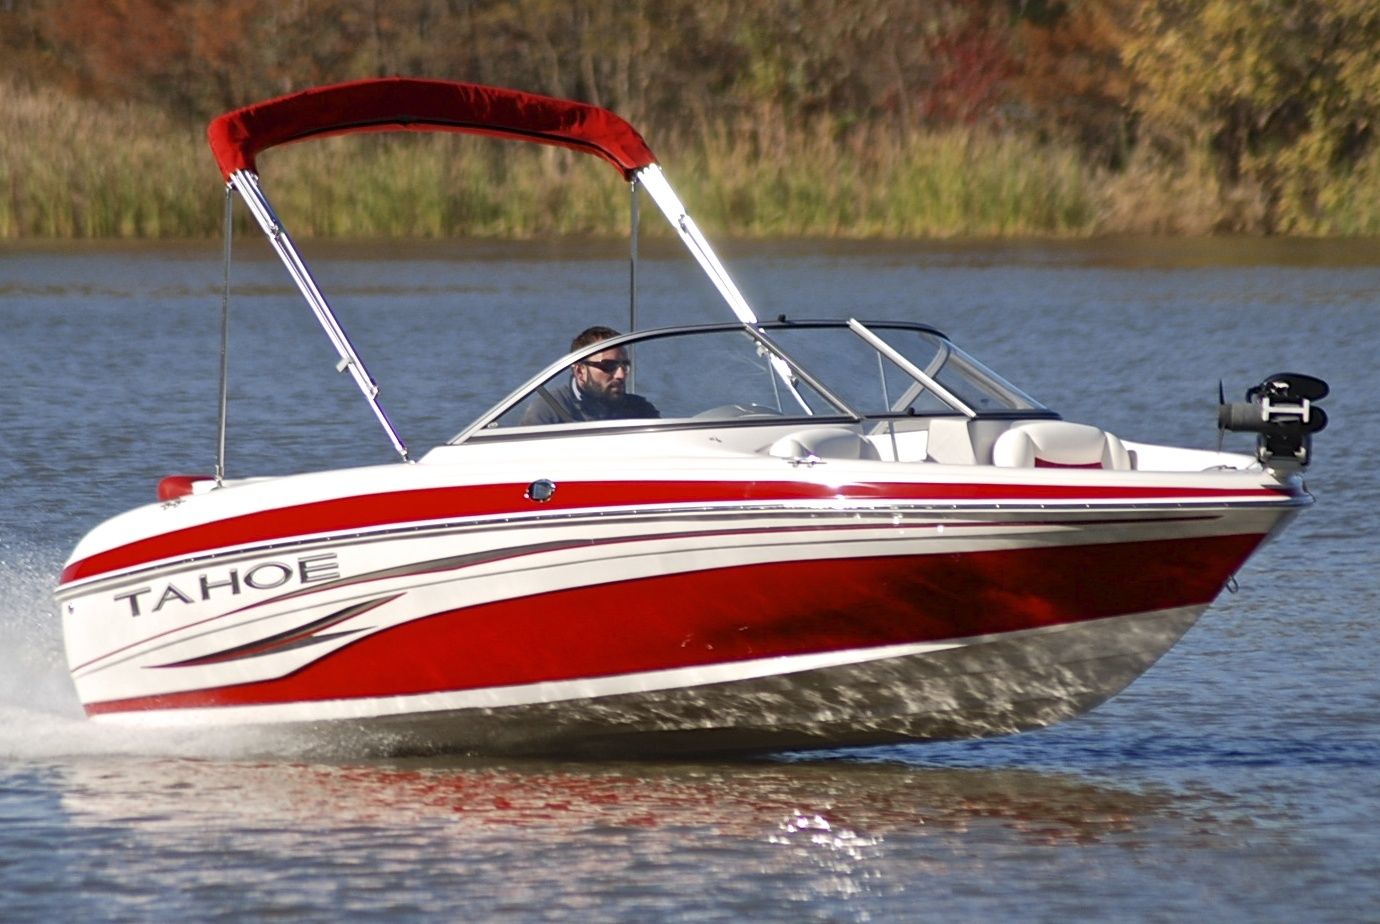 Tahoe Q4 Fish+Ski 2008 for sale for 14,900 Boatsfrom